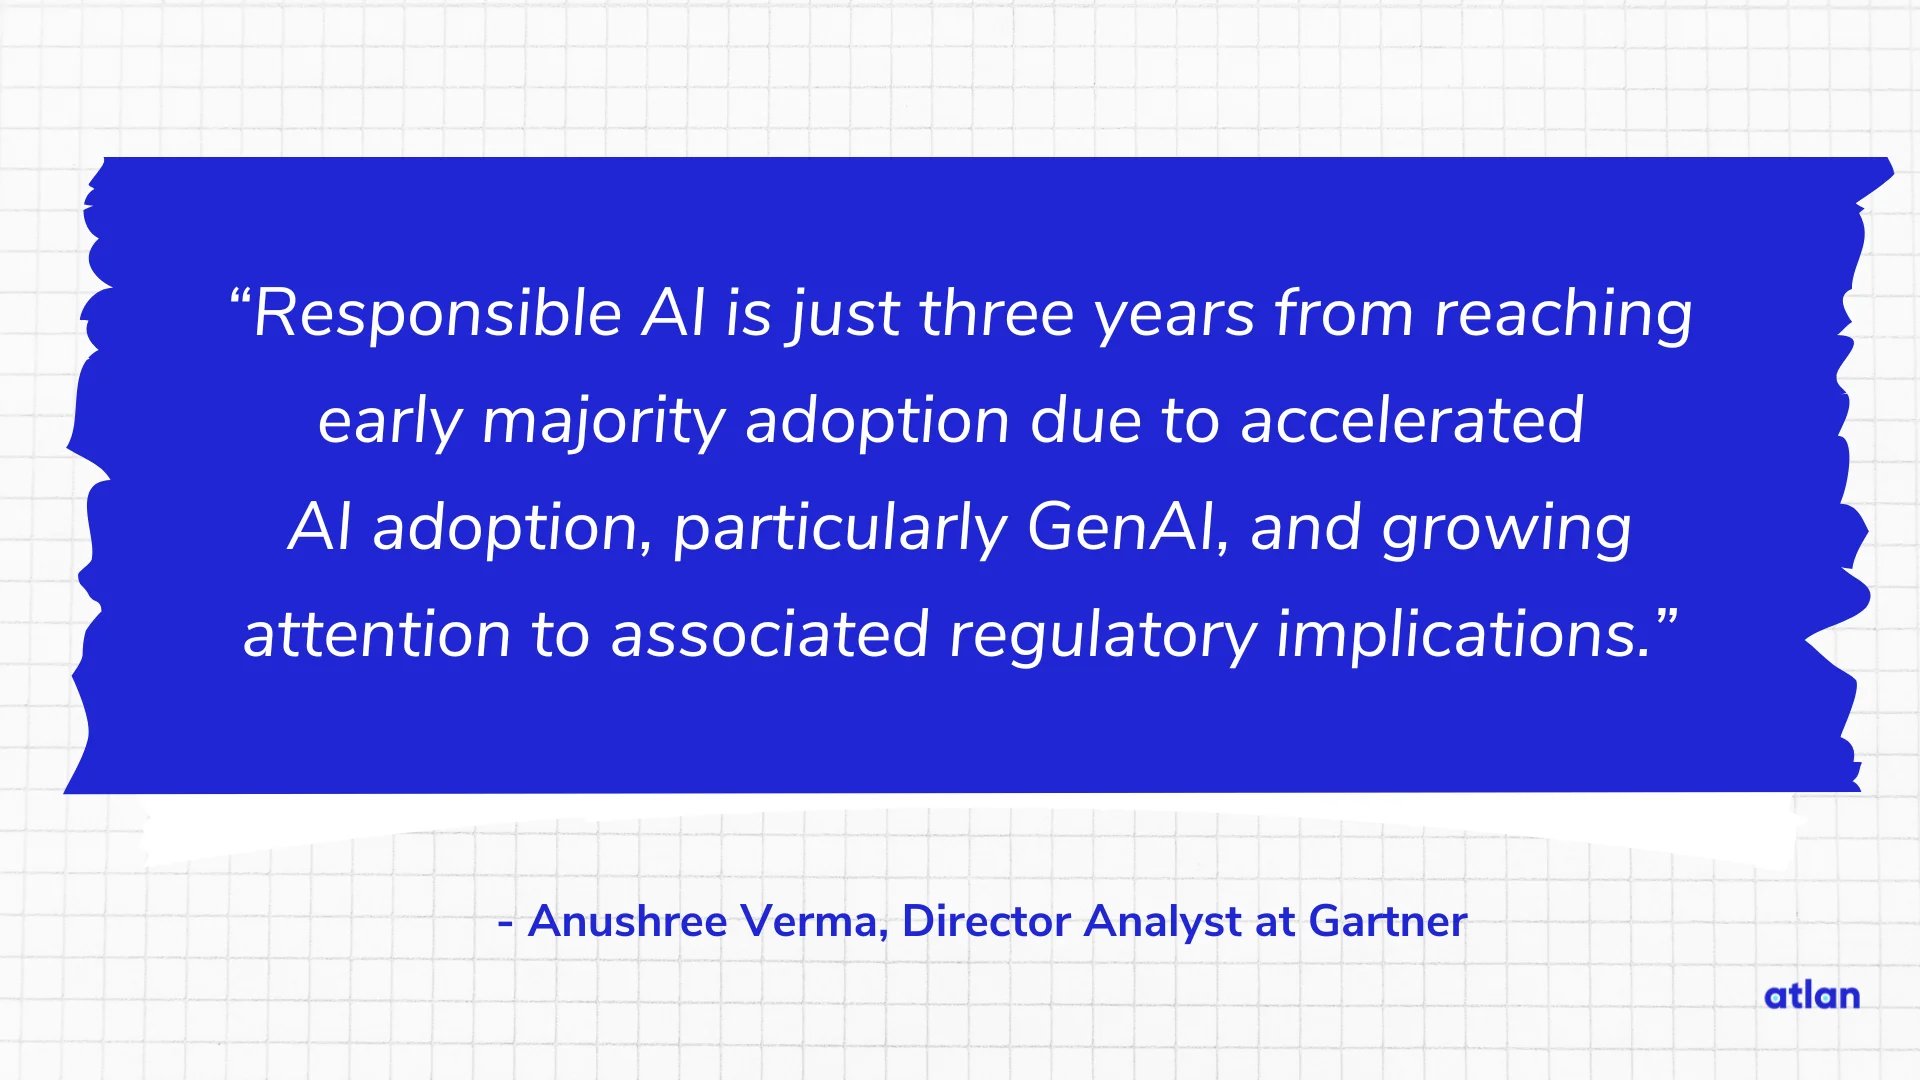 Responsible AI is just three years from reaching early majority adoption